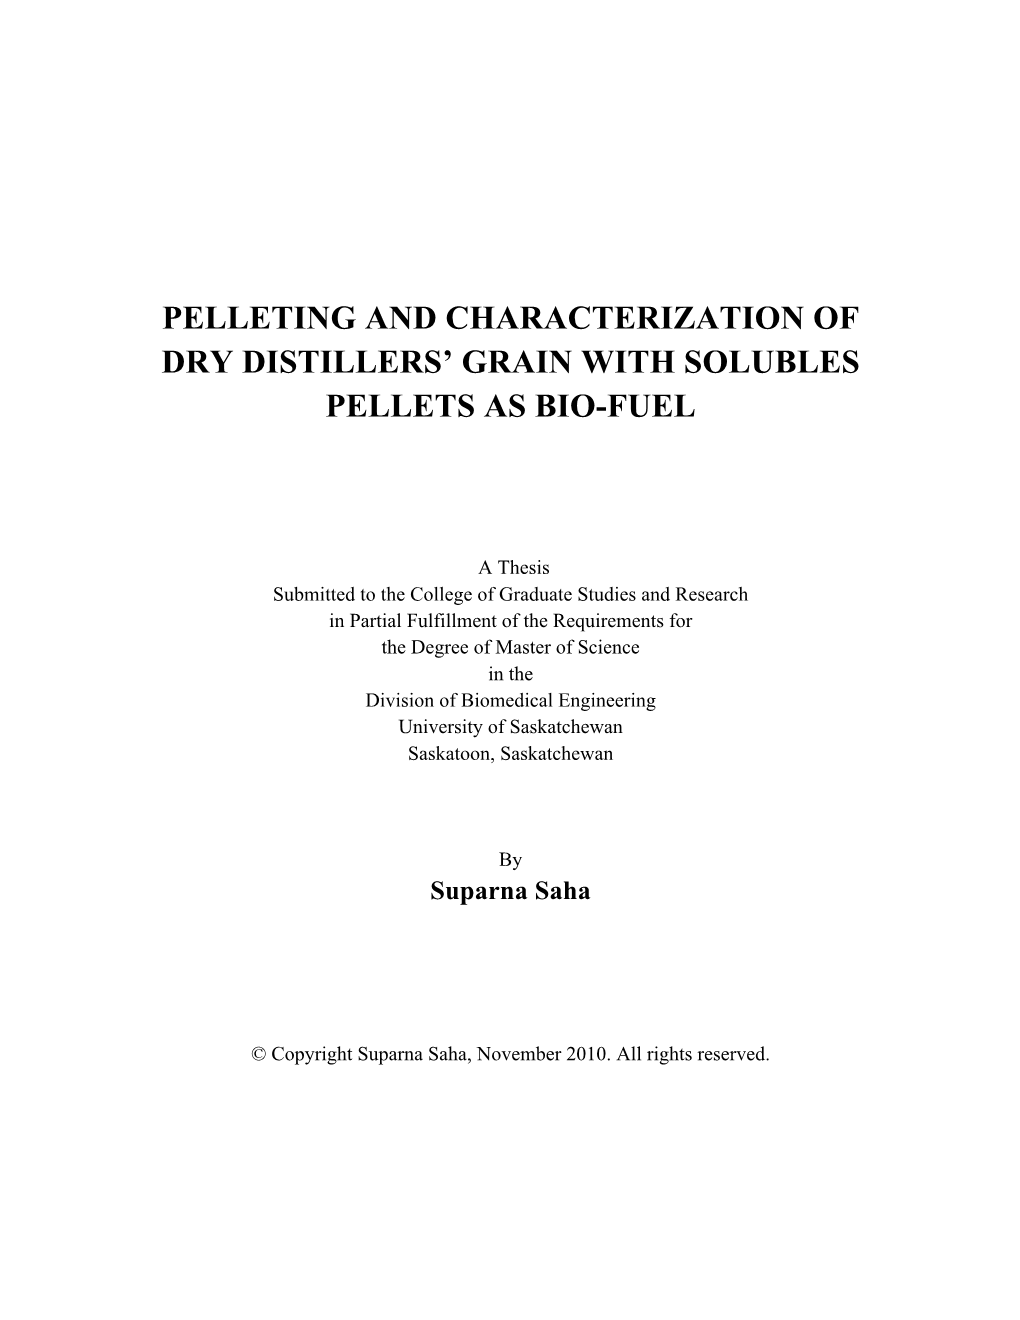 Pelleting and Characterization of Dry Distillers' Grain with Solubles Pellets